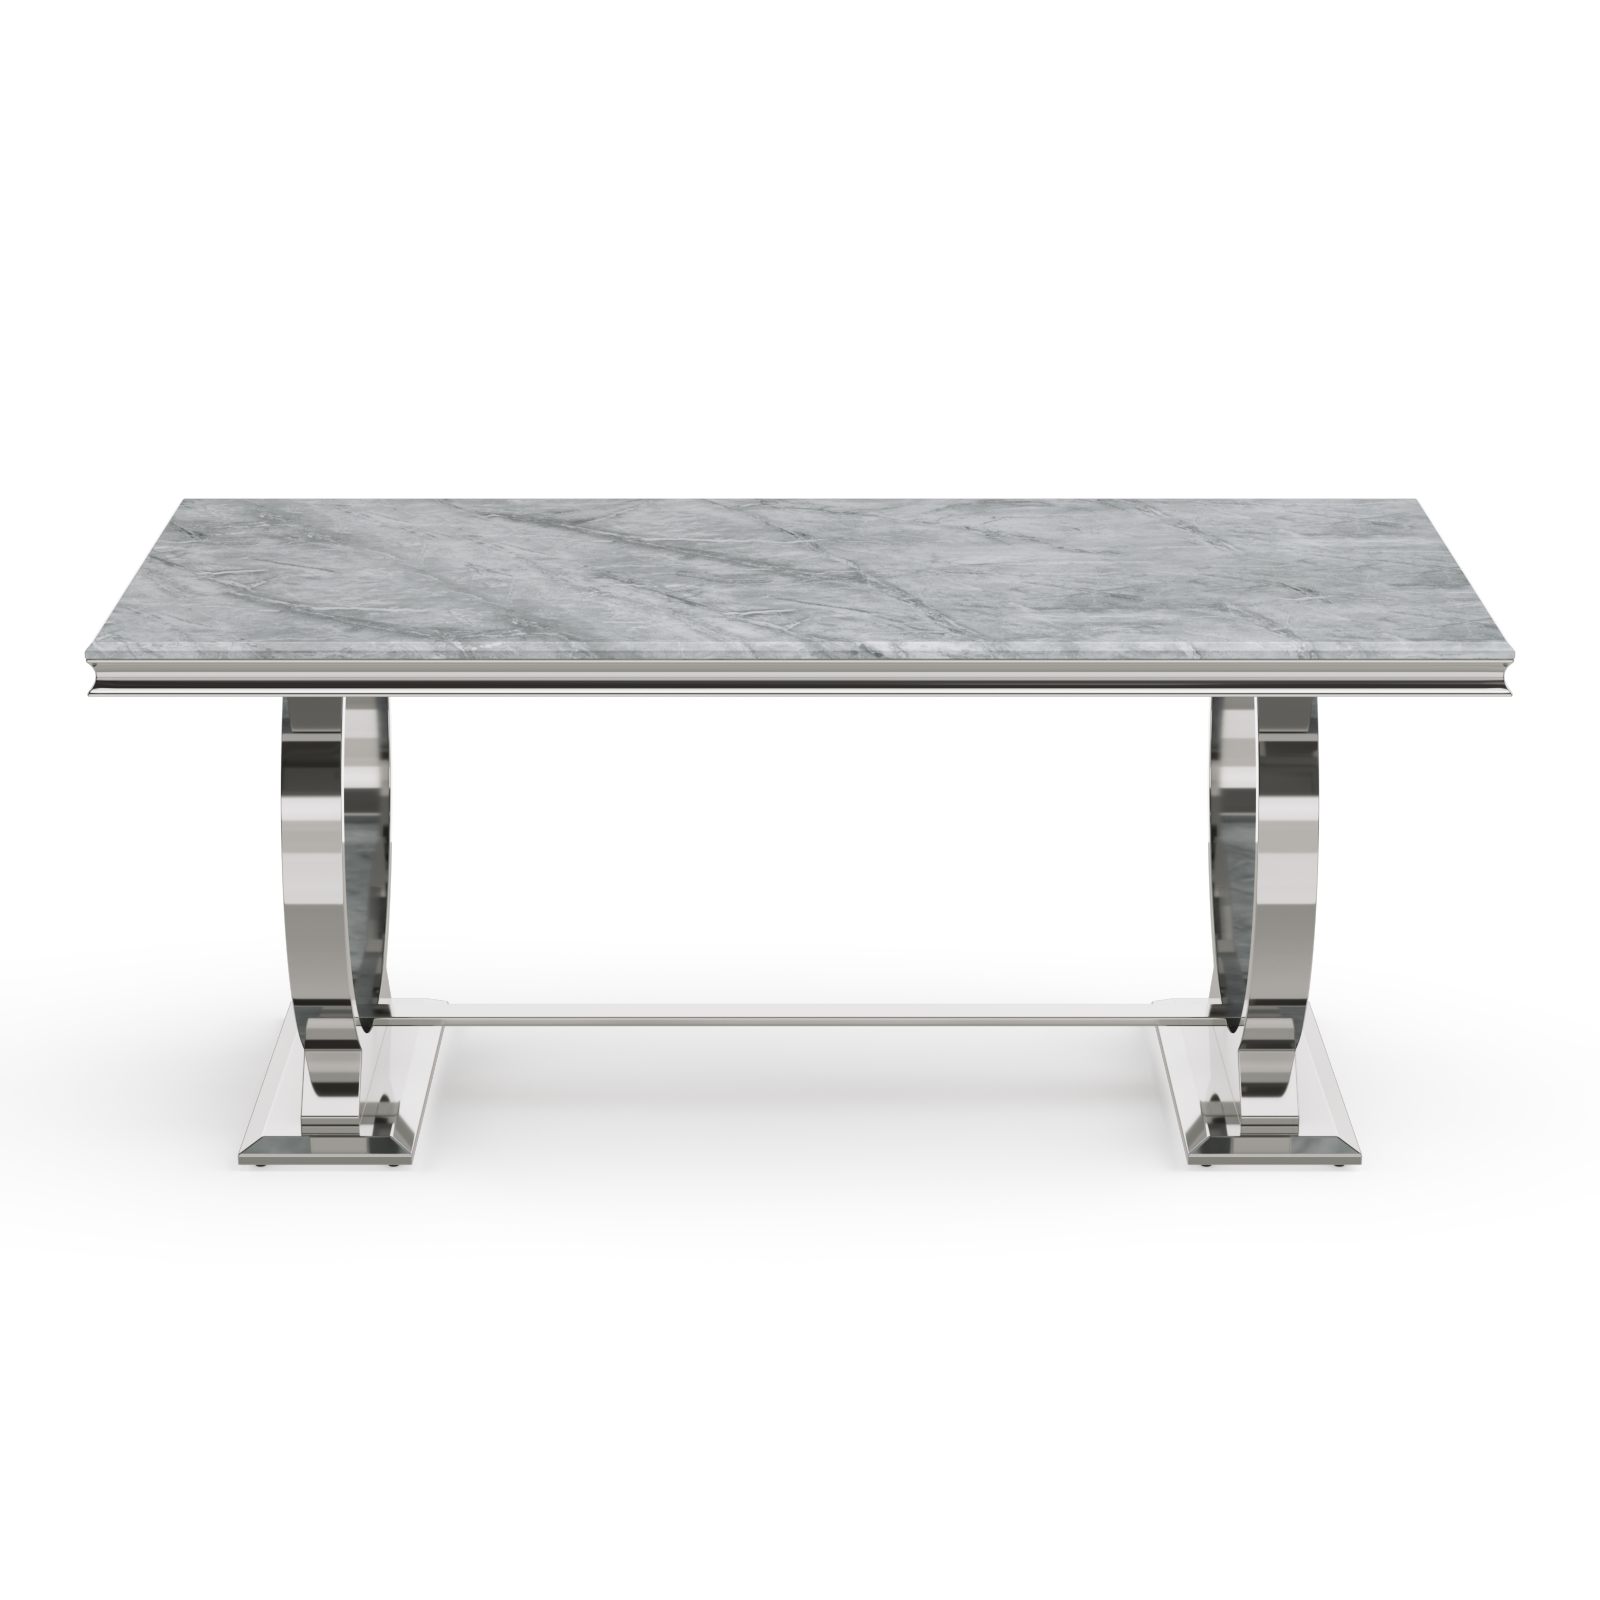 624-Set | AUZ Silver and Gray Dining room Sets for 6